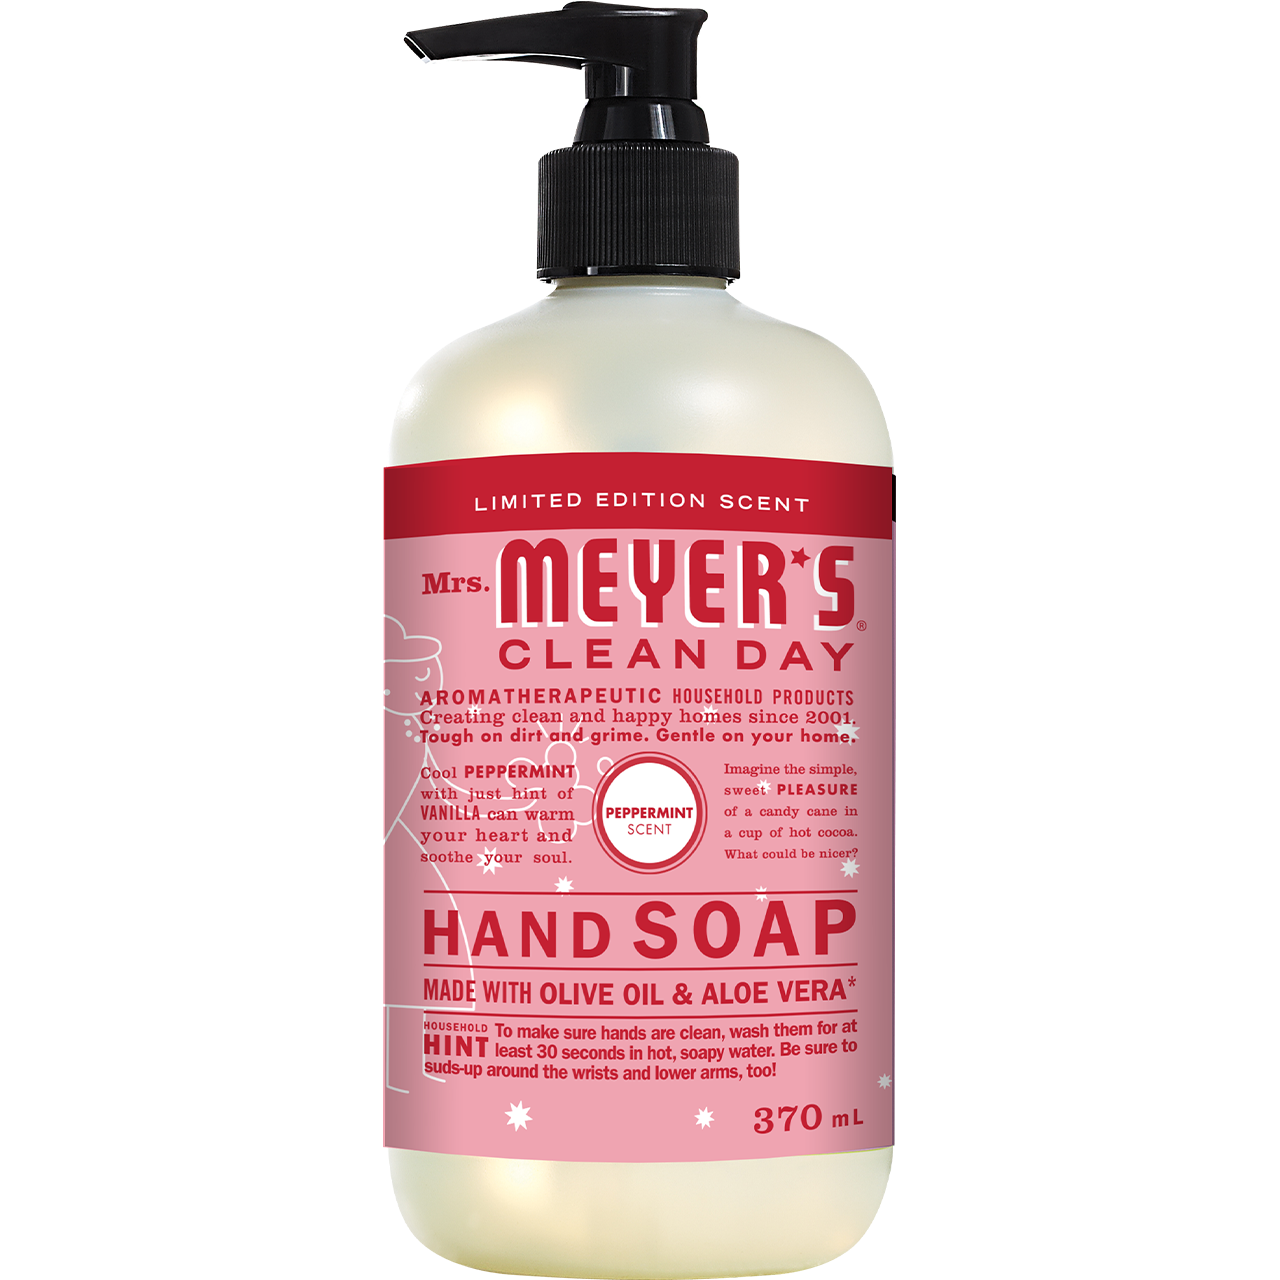 Peppermint Hand Wash by Mrs. Meyer's, 370ml